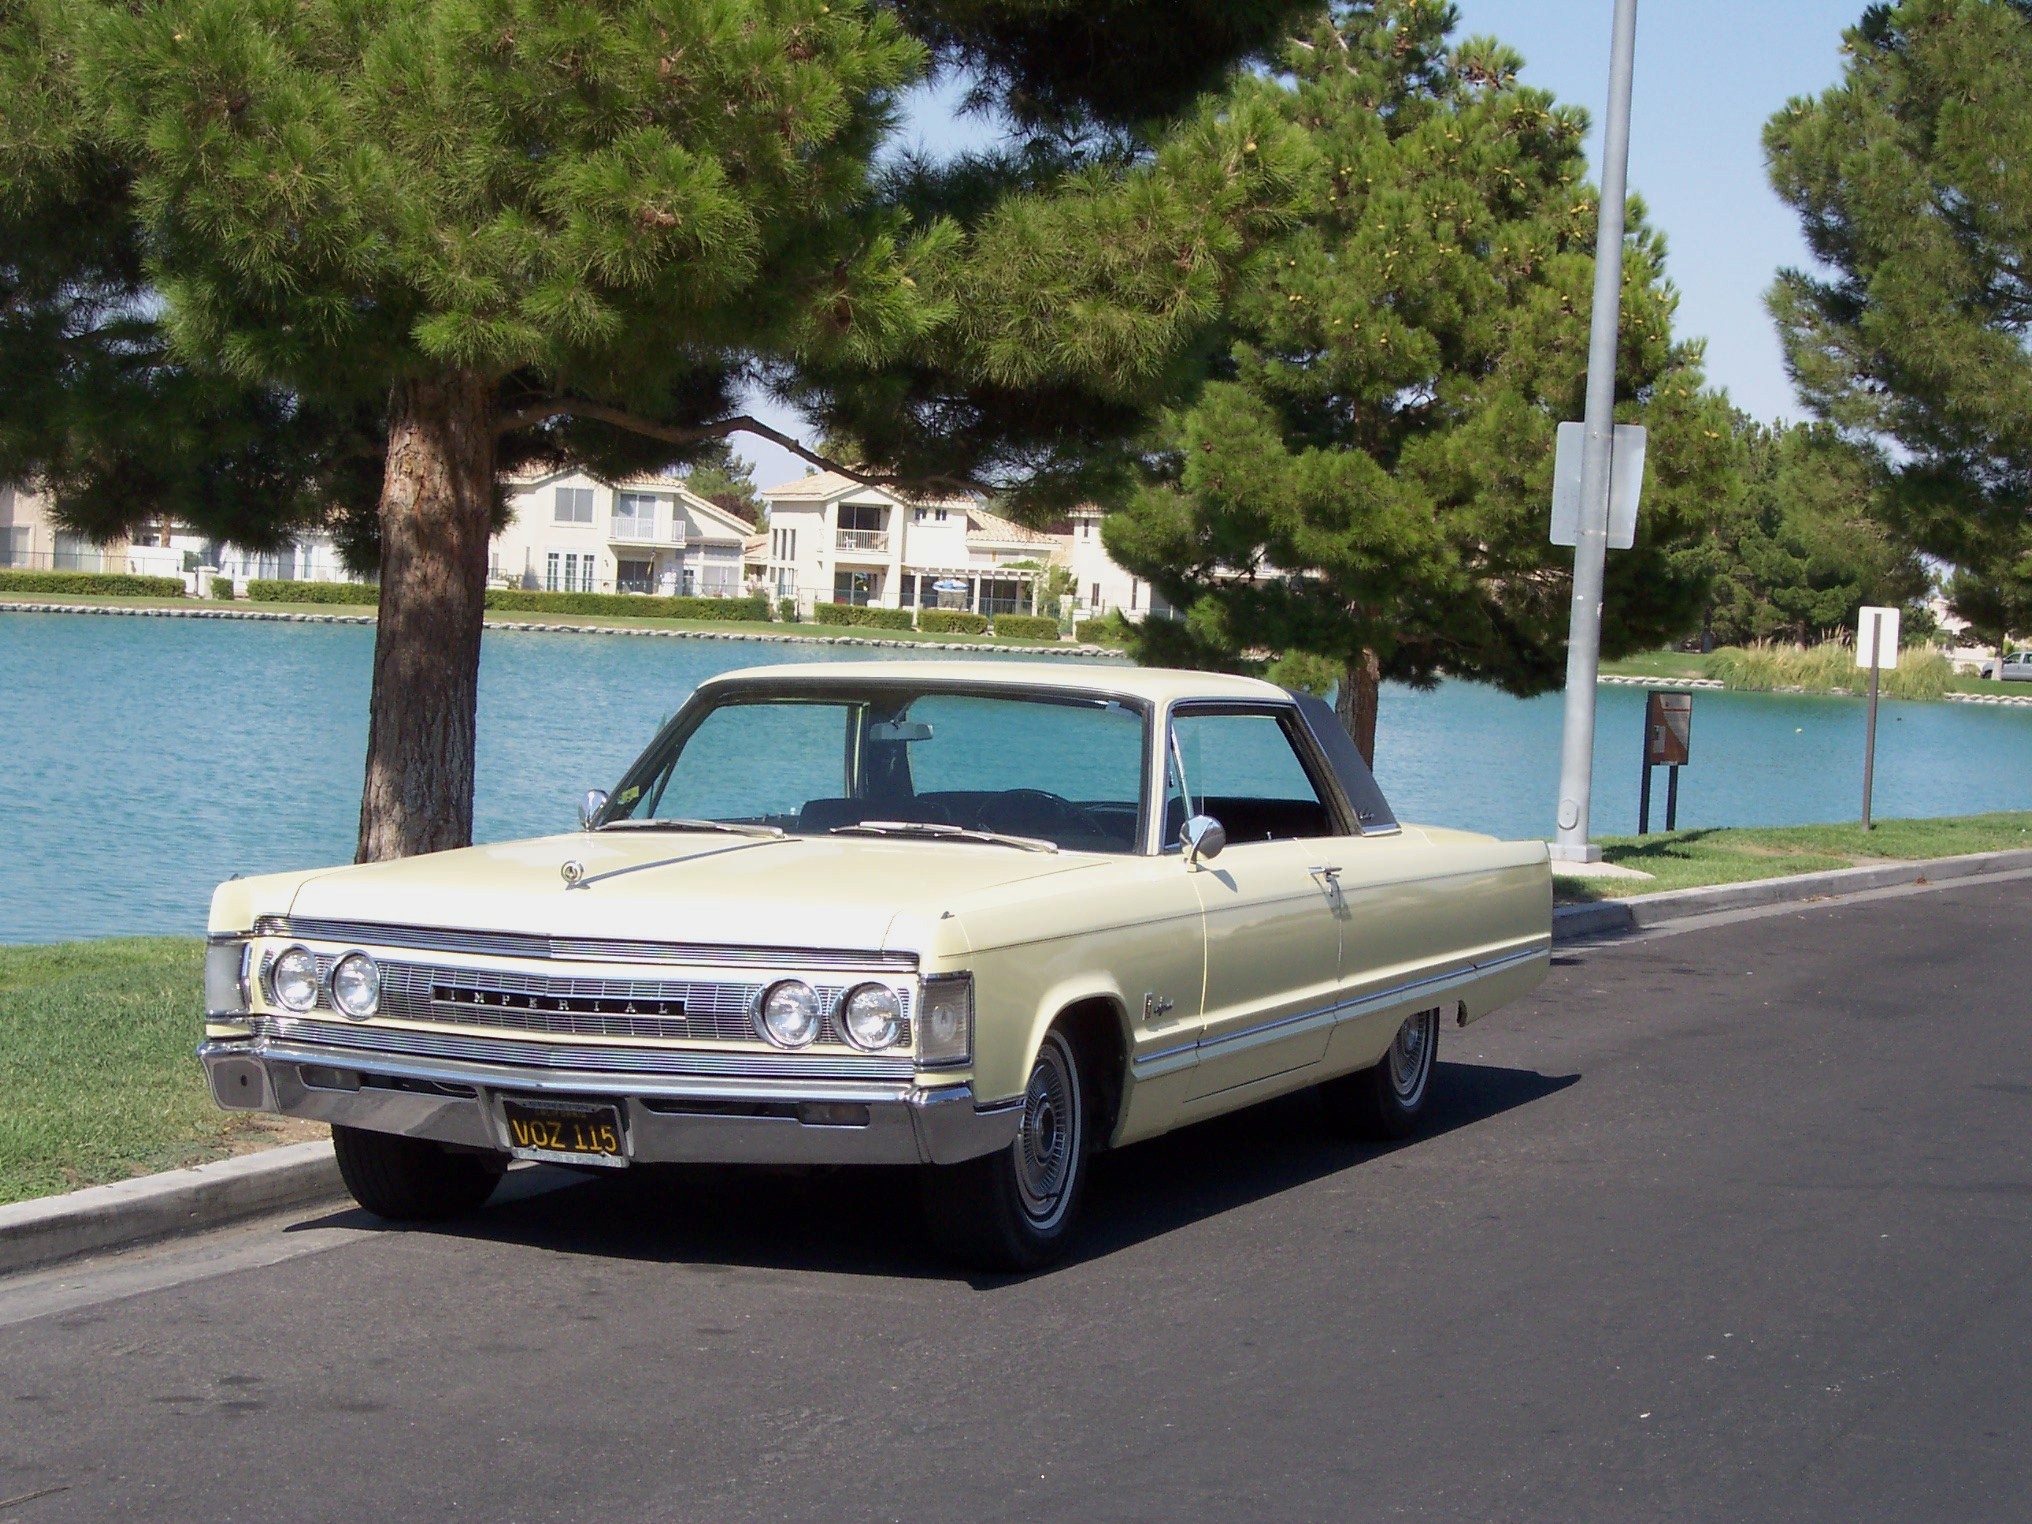 1967 Chrysler Imperial Crown Coupe HD wallpapers, Desktop wallpaper - most viewed